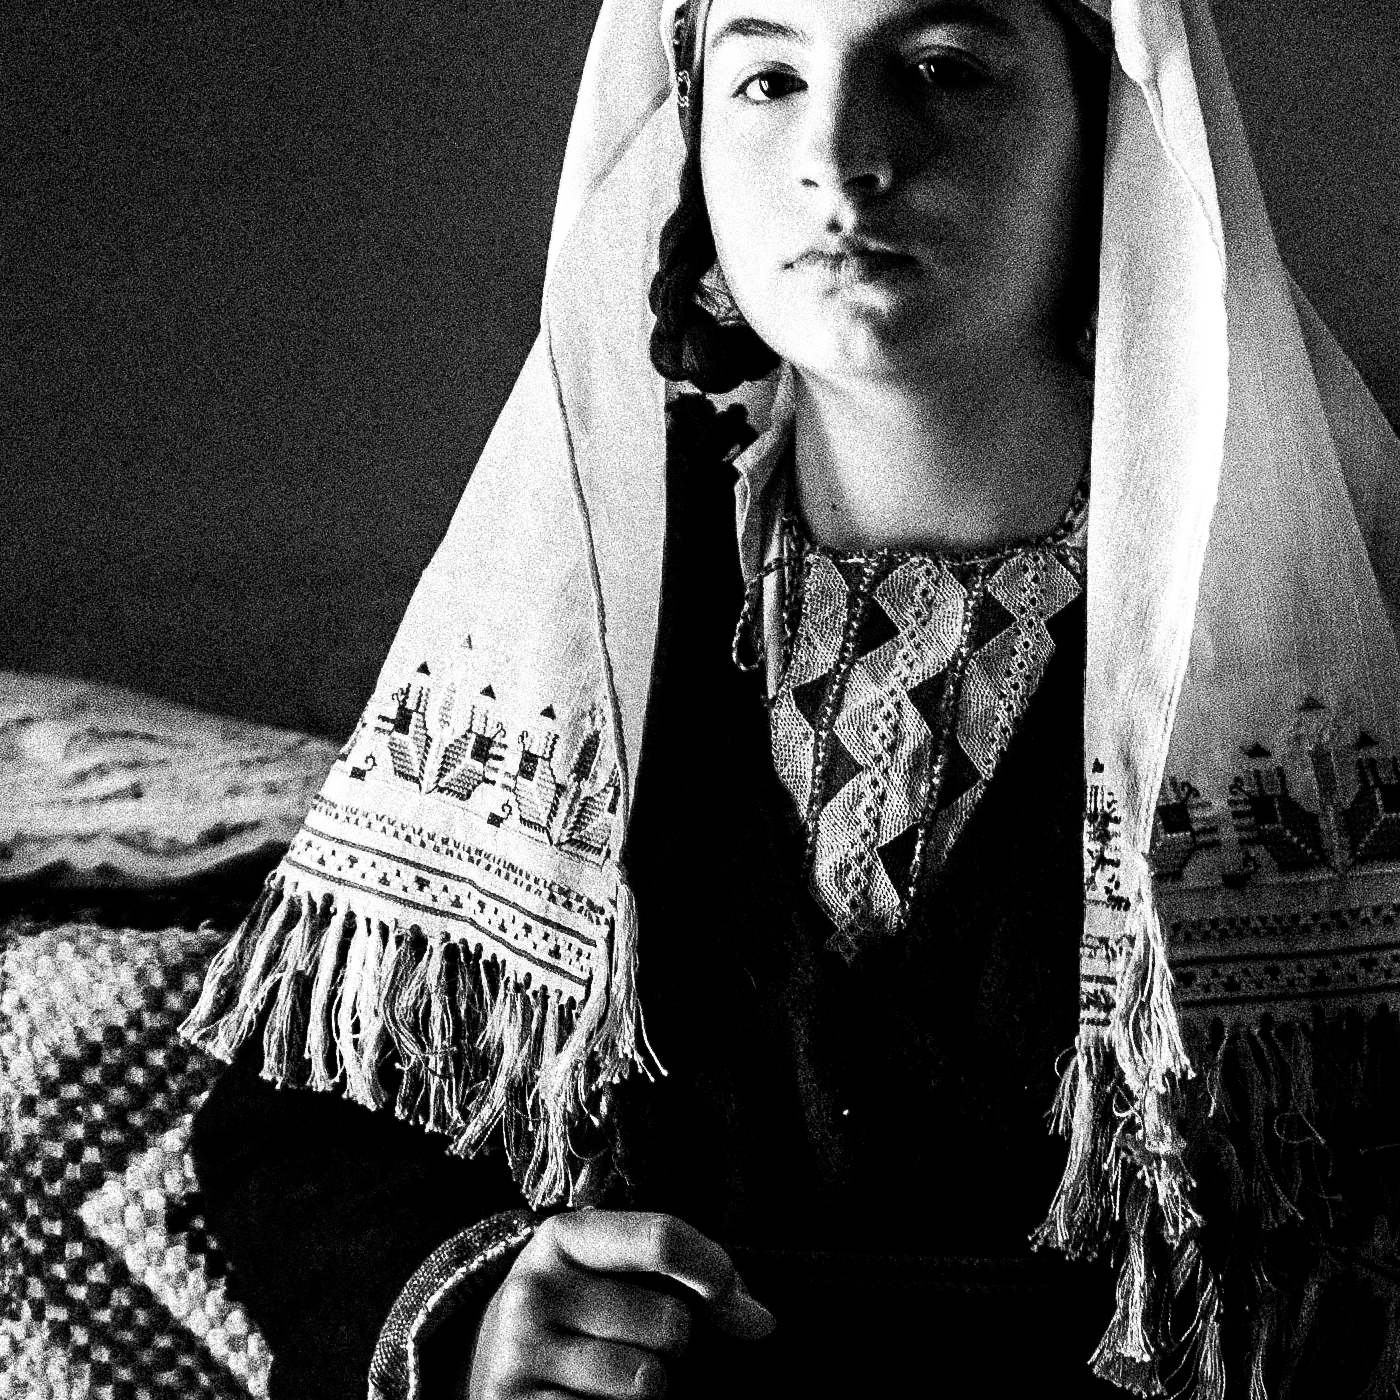 Black and White Photography Wall Art Greece | Costume of Tilos island inside a traditional home Dodecanese Greece by George Tatakis - detailed view